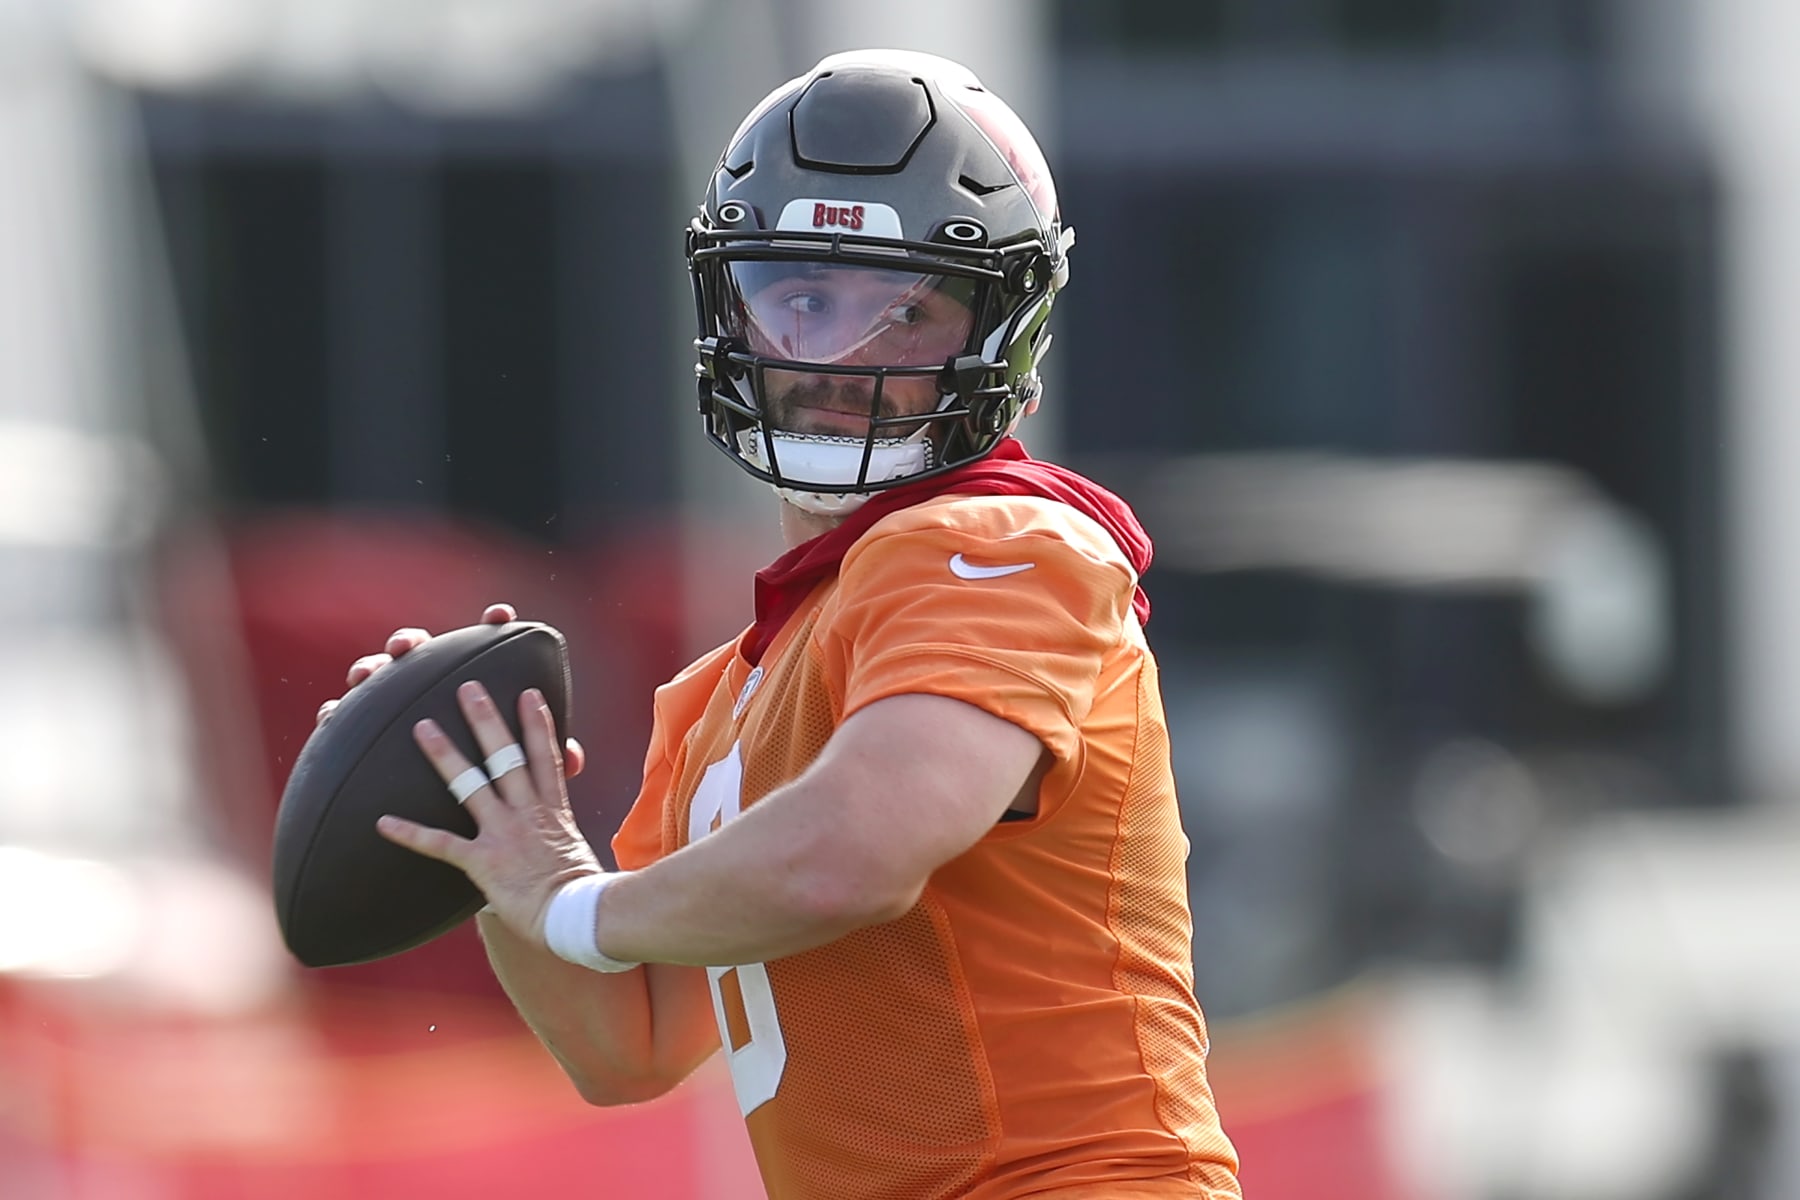 Bucs Analysis: Where the QB competition stands after Friday's game